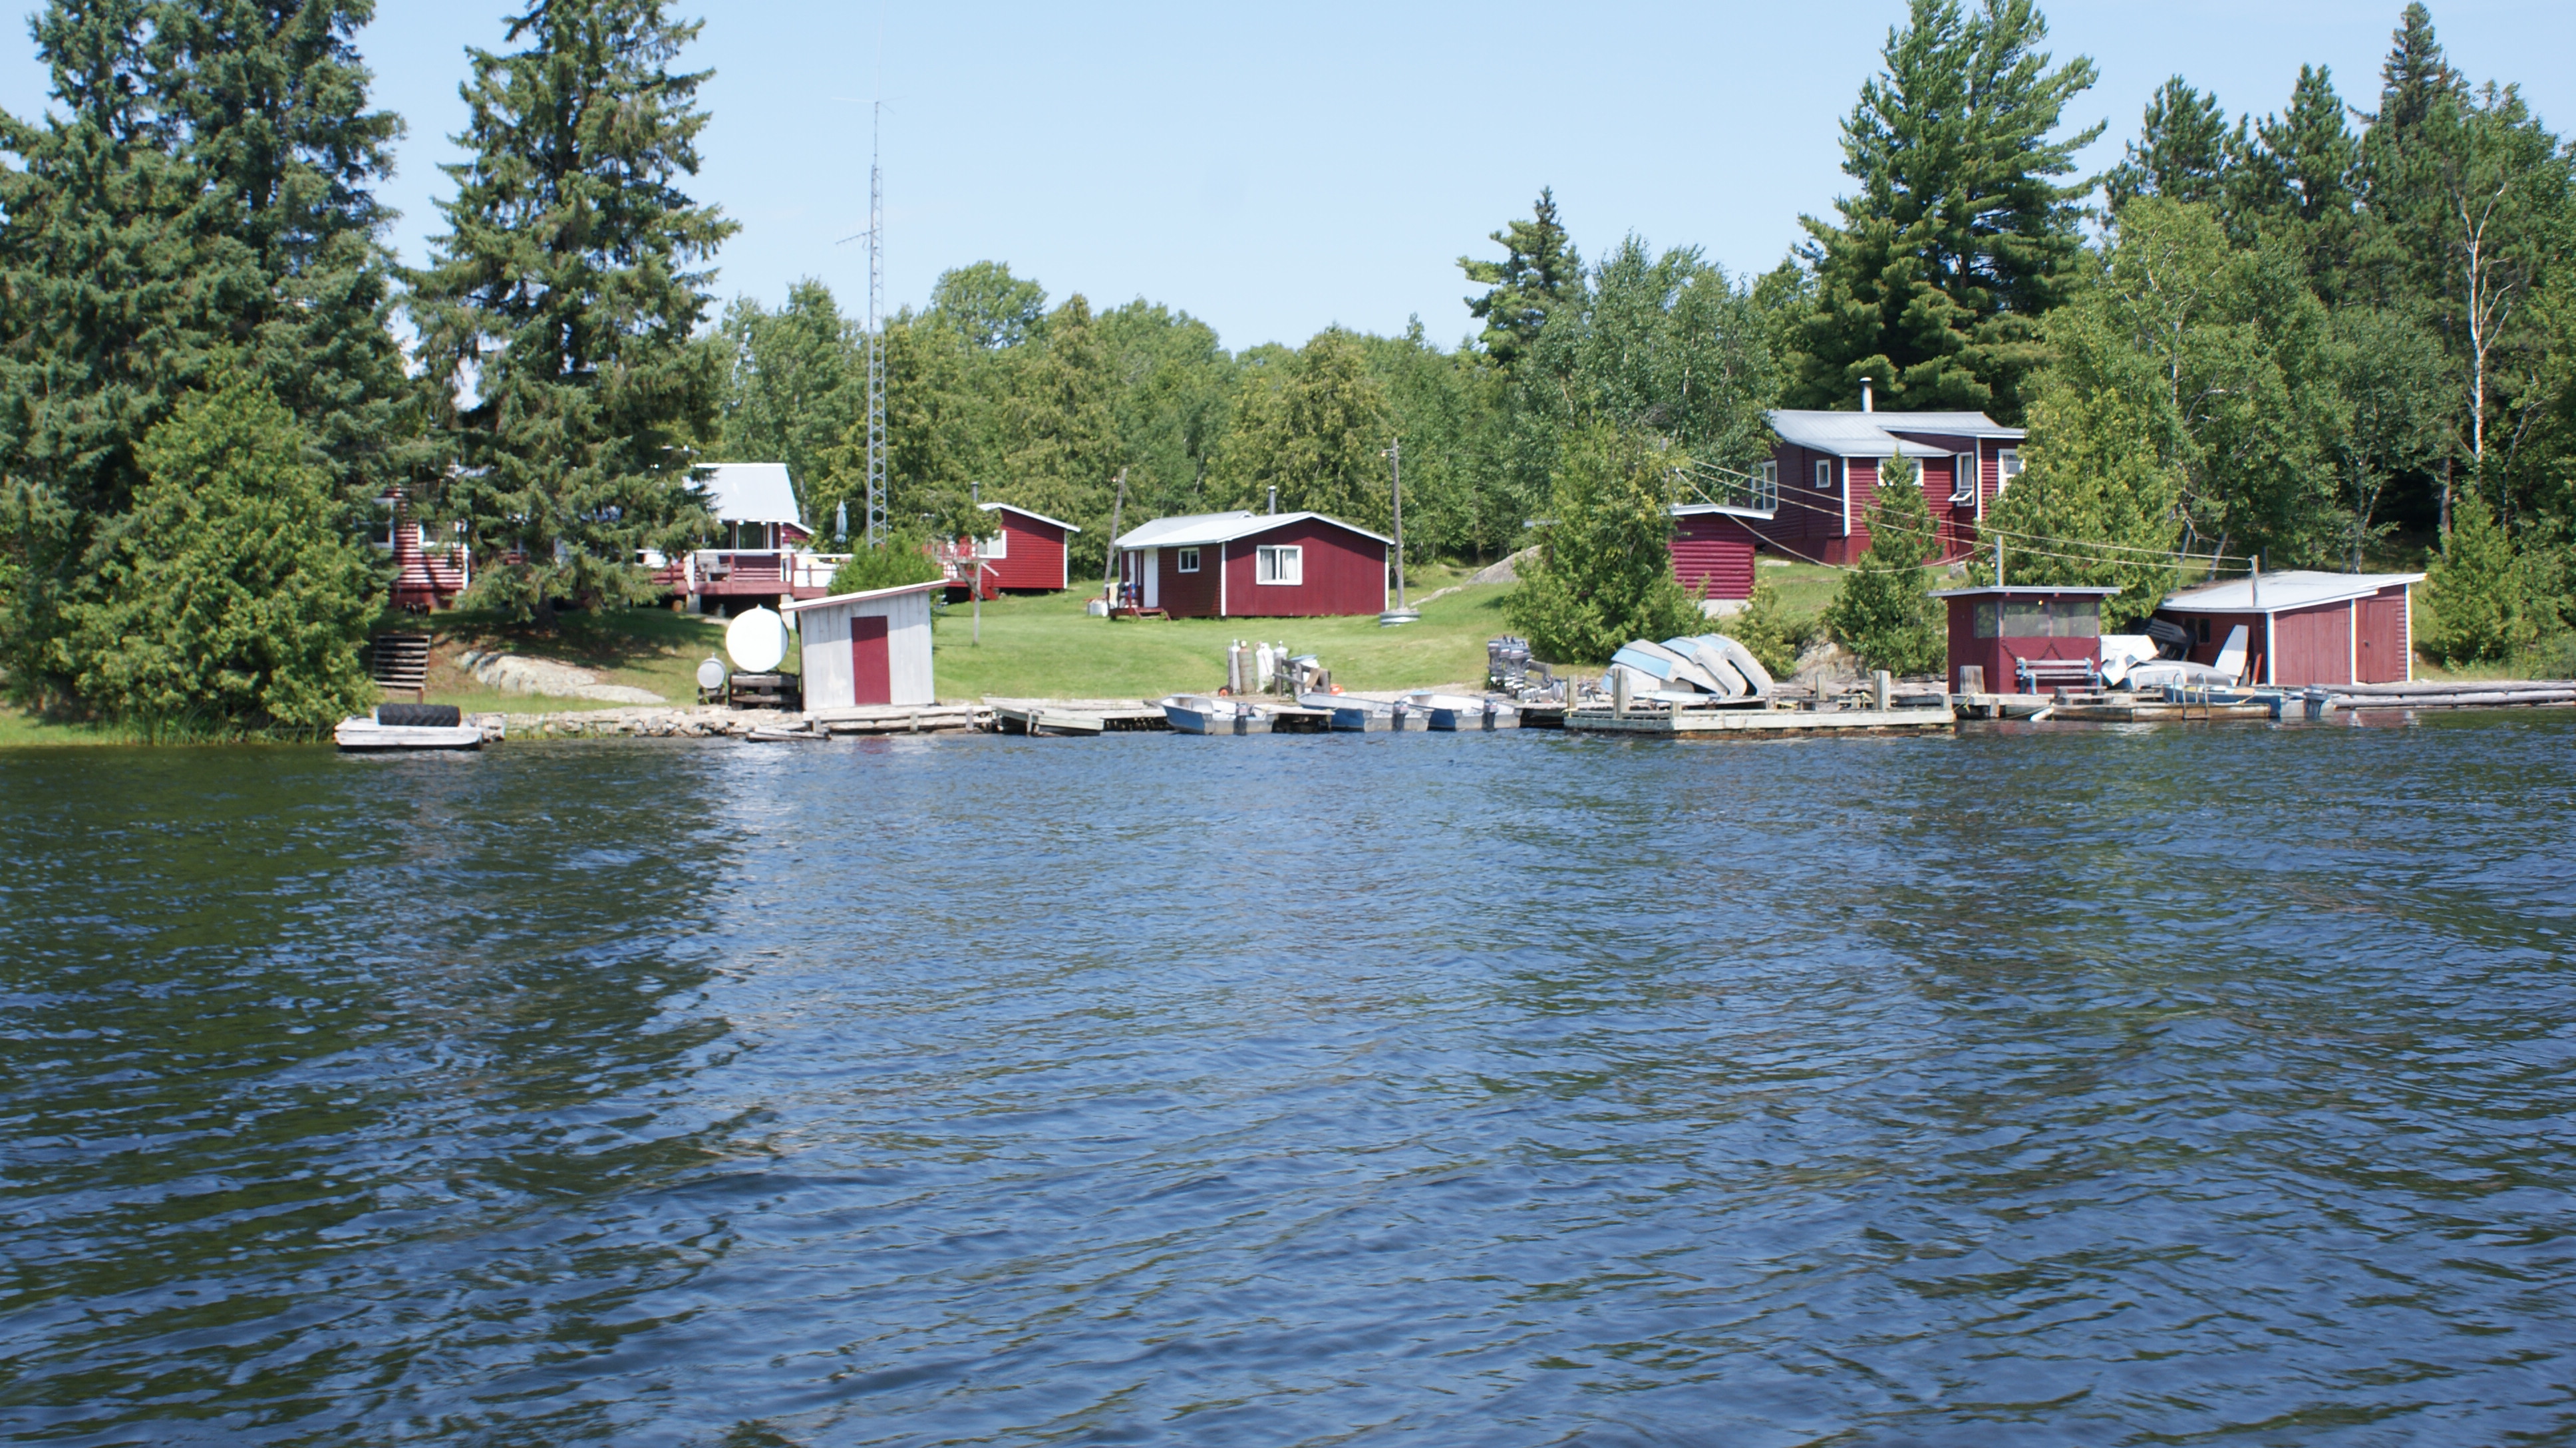 Fly-in remote fishing camp - several fully equiped cabins to enjoy your stay